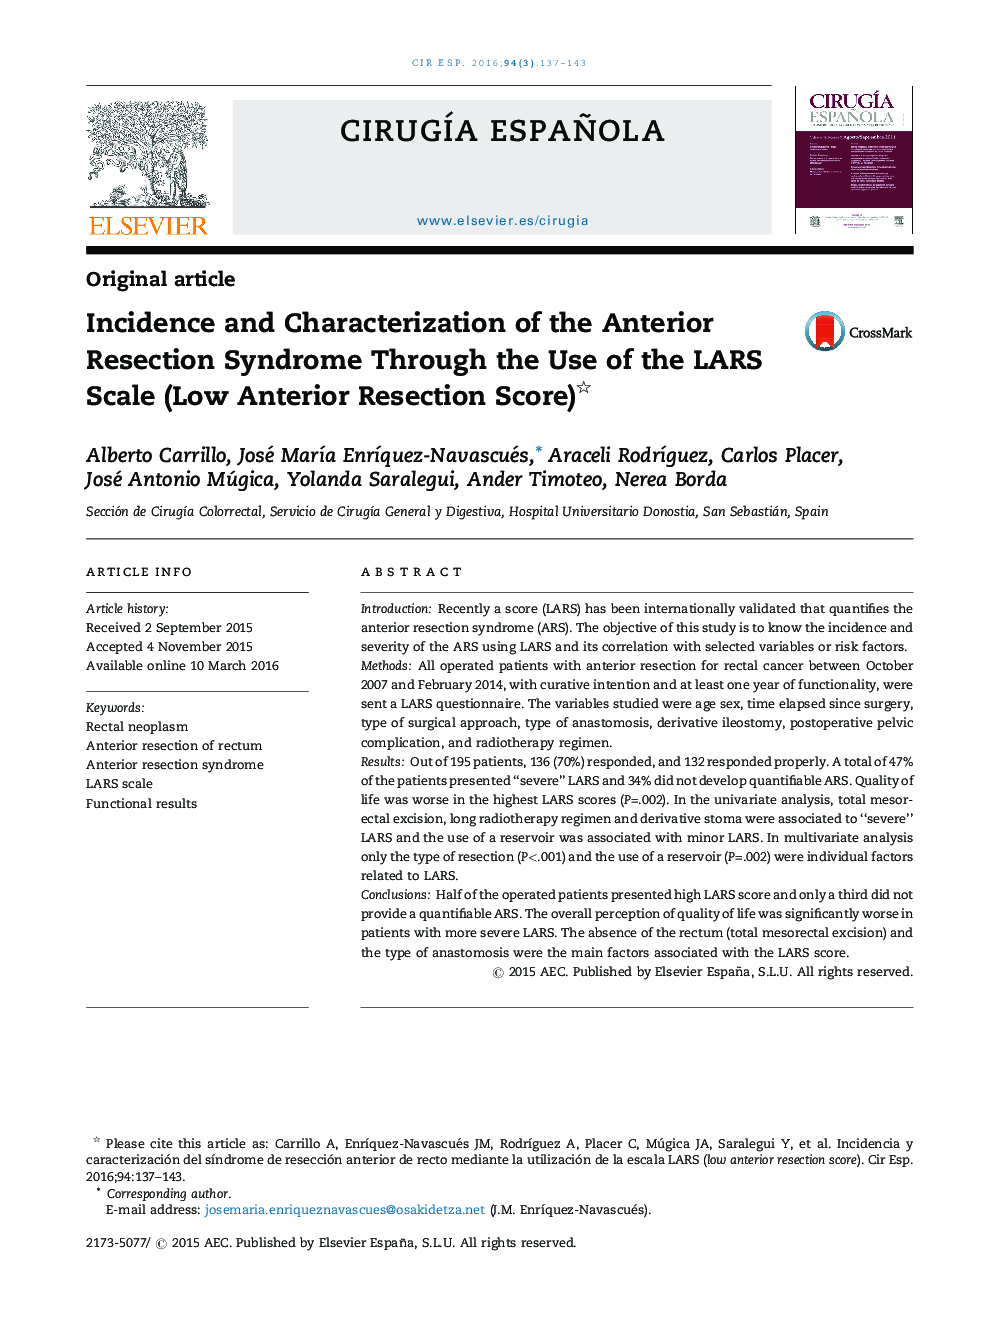 Incidence and Characterization of the Anterior Resection Syndrome Through the Use of the LARS Scale (Low Anterior Resection Score) 